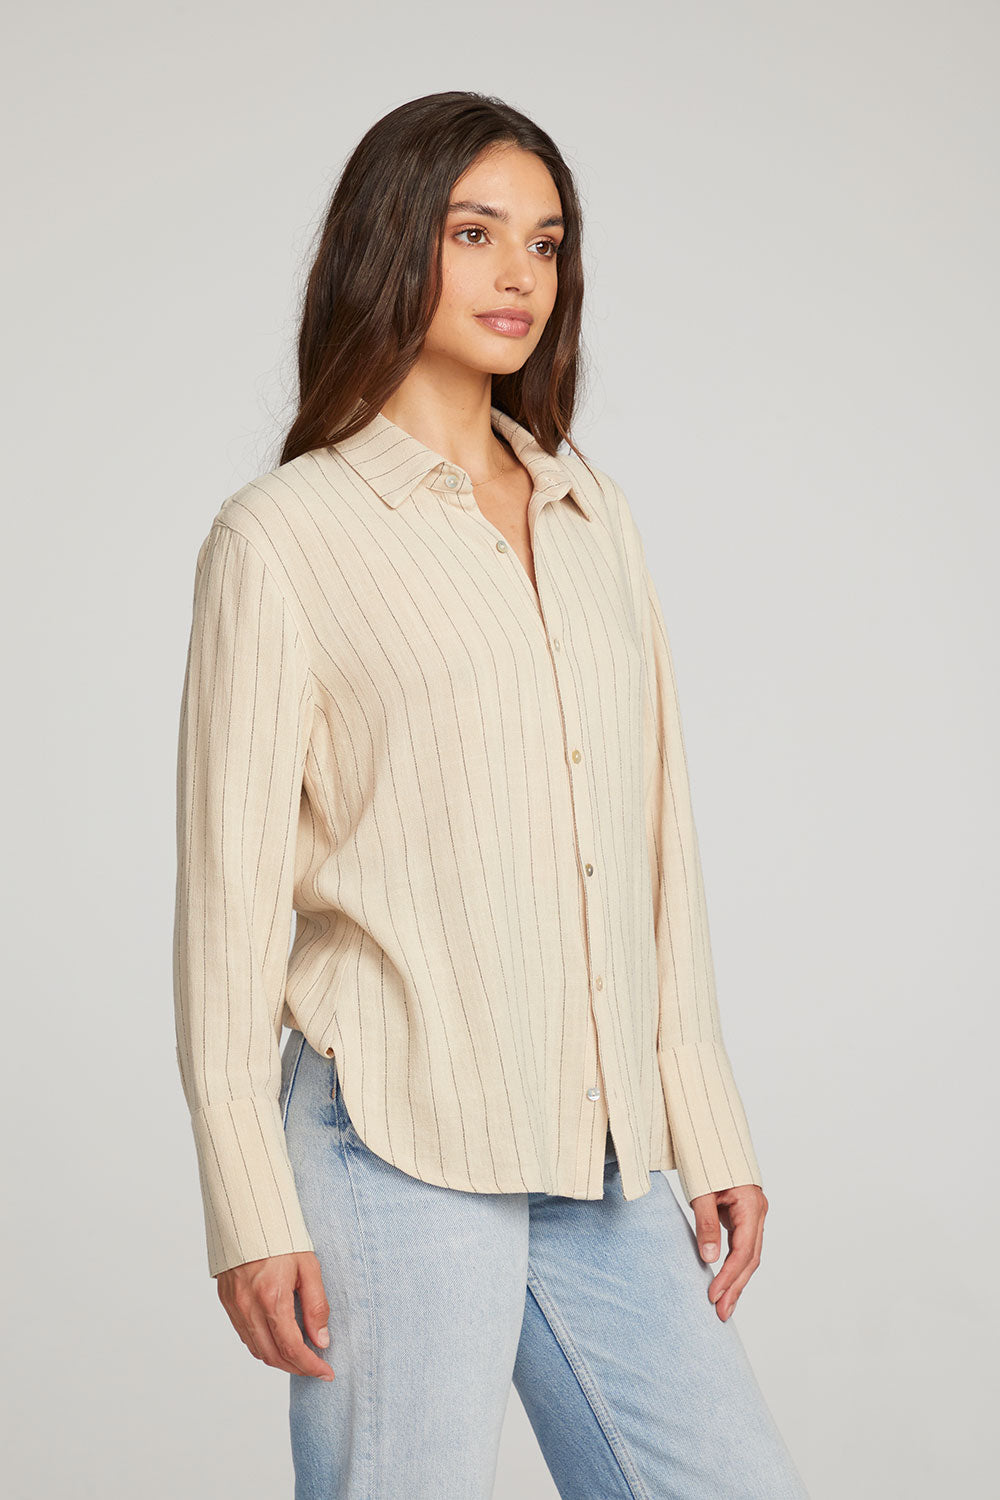 Helena White Pinstripe Button Down WOMENS chaserbrand